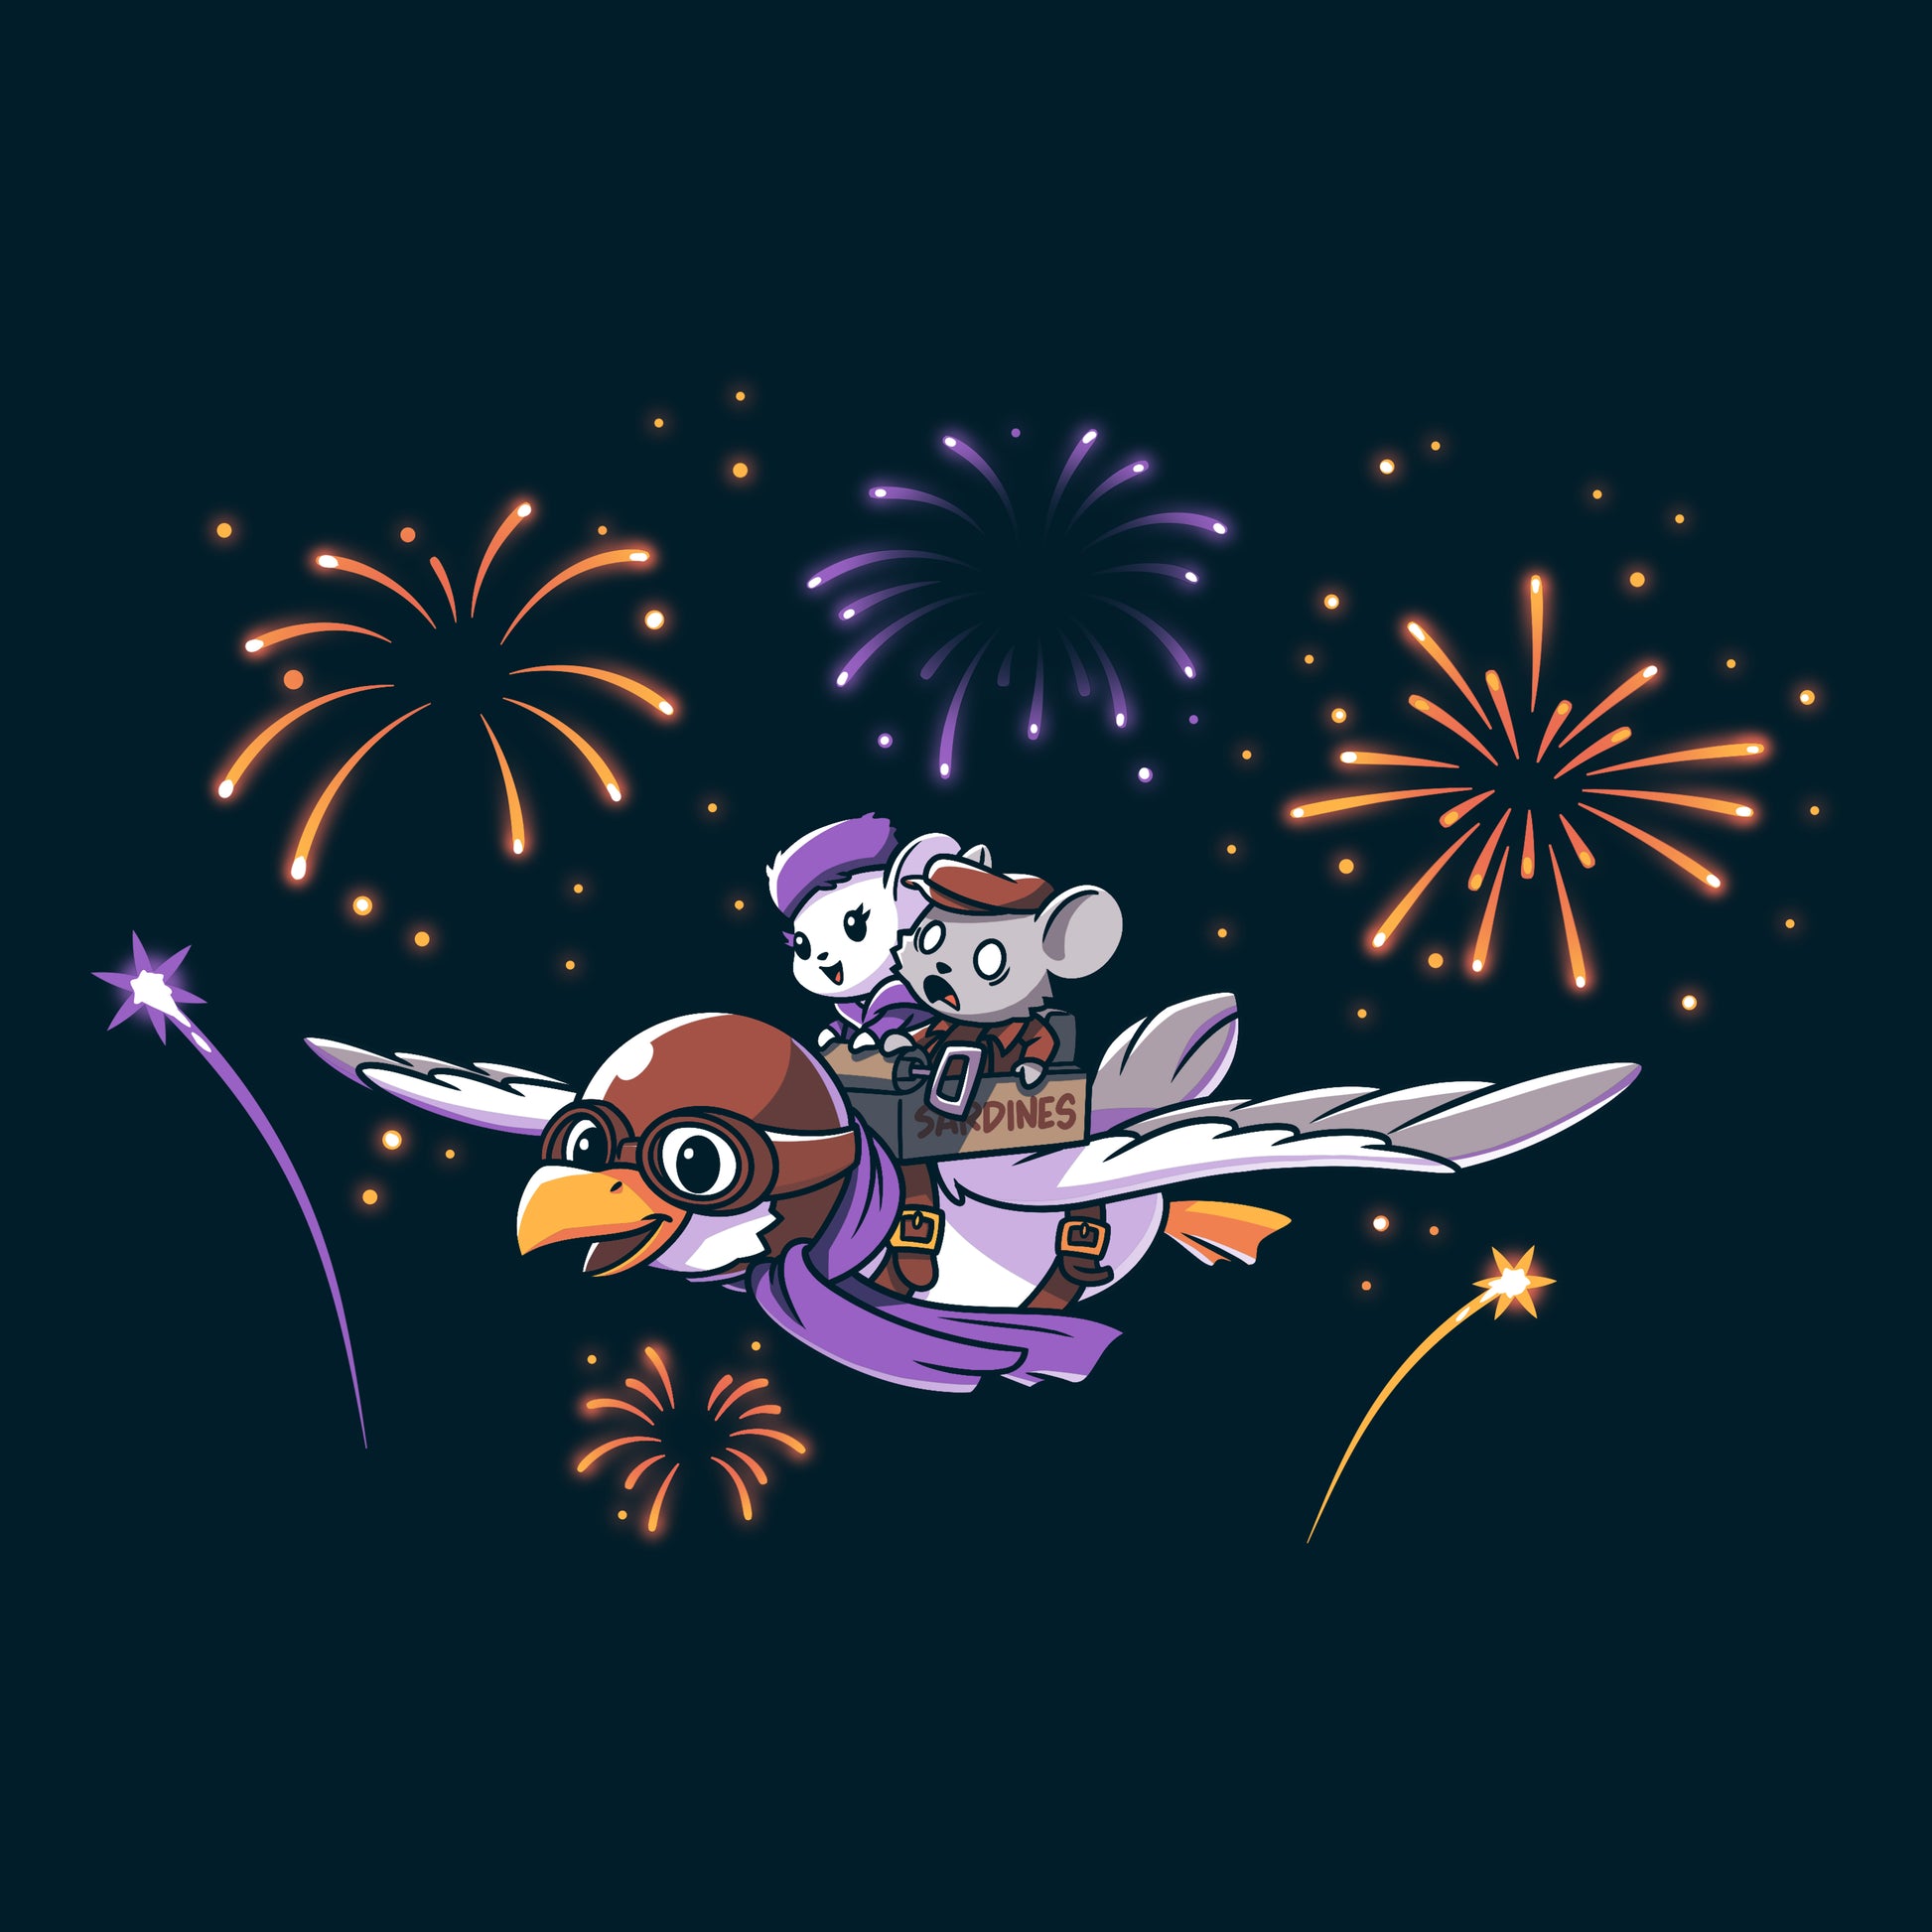 A cat and a mouse flying in a Disney Albatross Air Service plane with fireworks.